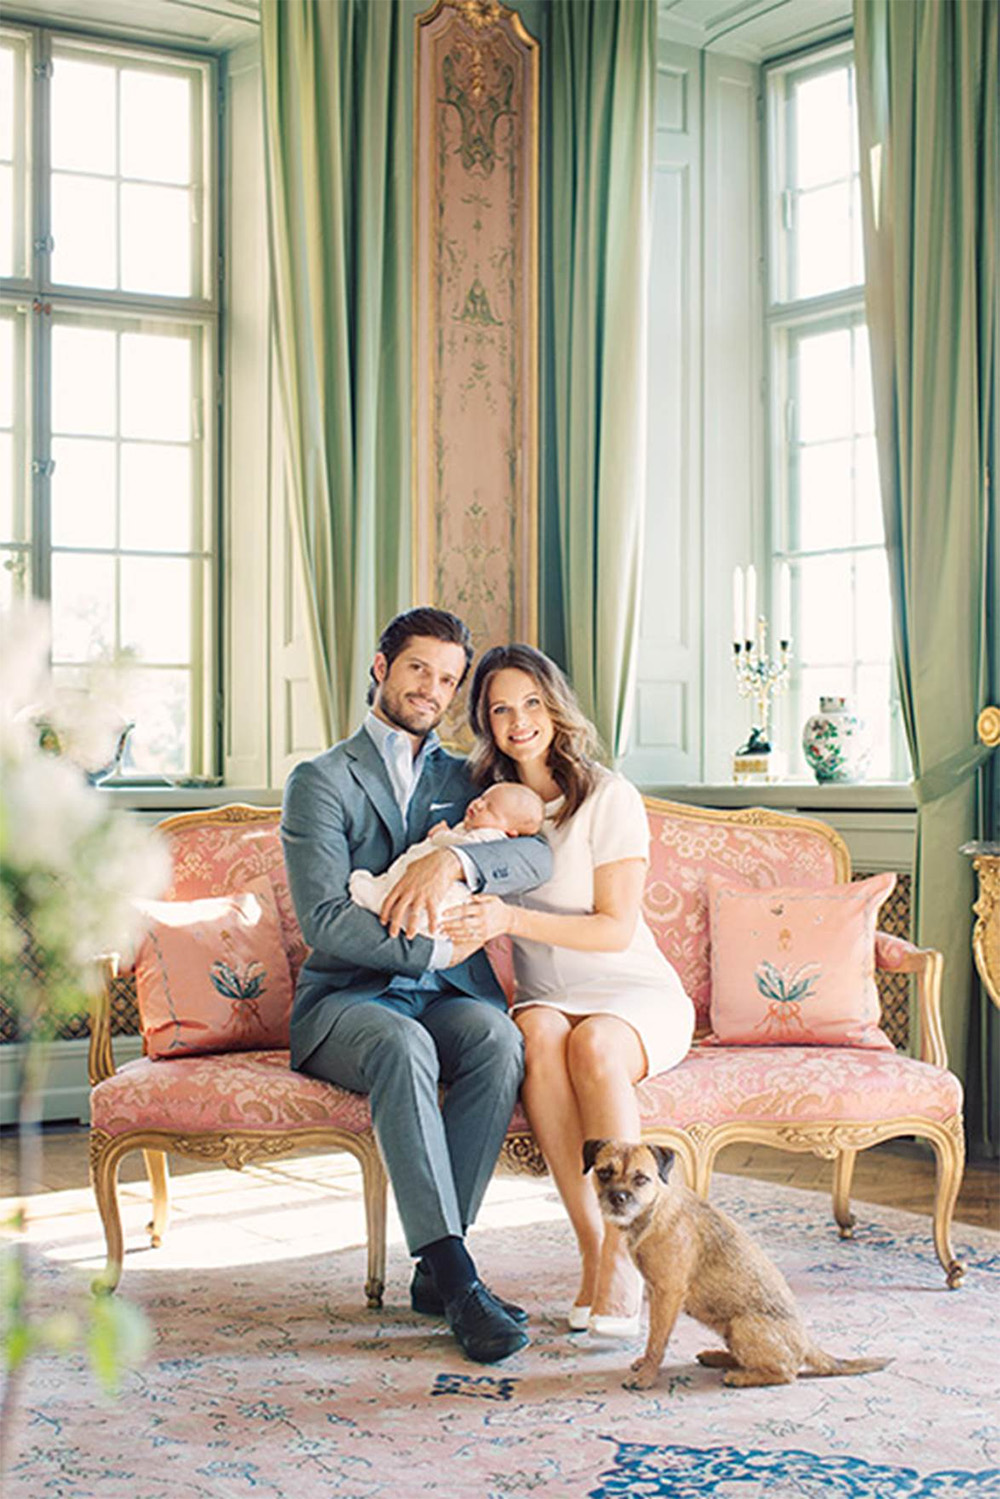 Prince Carl Philip and Princess Sofia of Sweden pose with their newborn son Prince Alexander in one of the the sitting room's in Drottningholm Palace, Sweden.